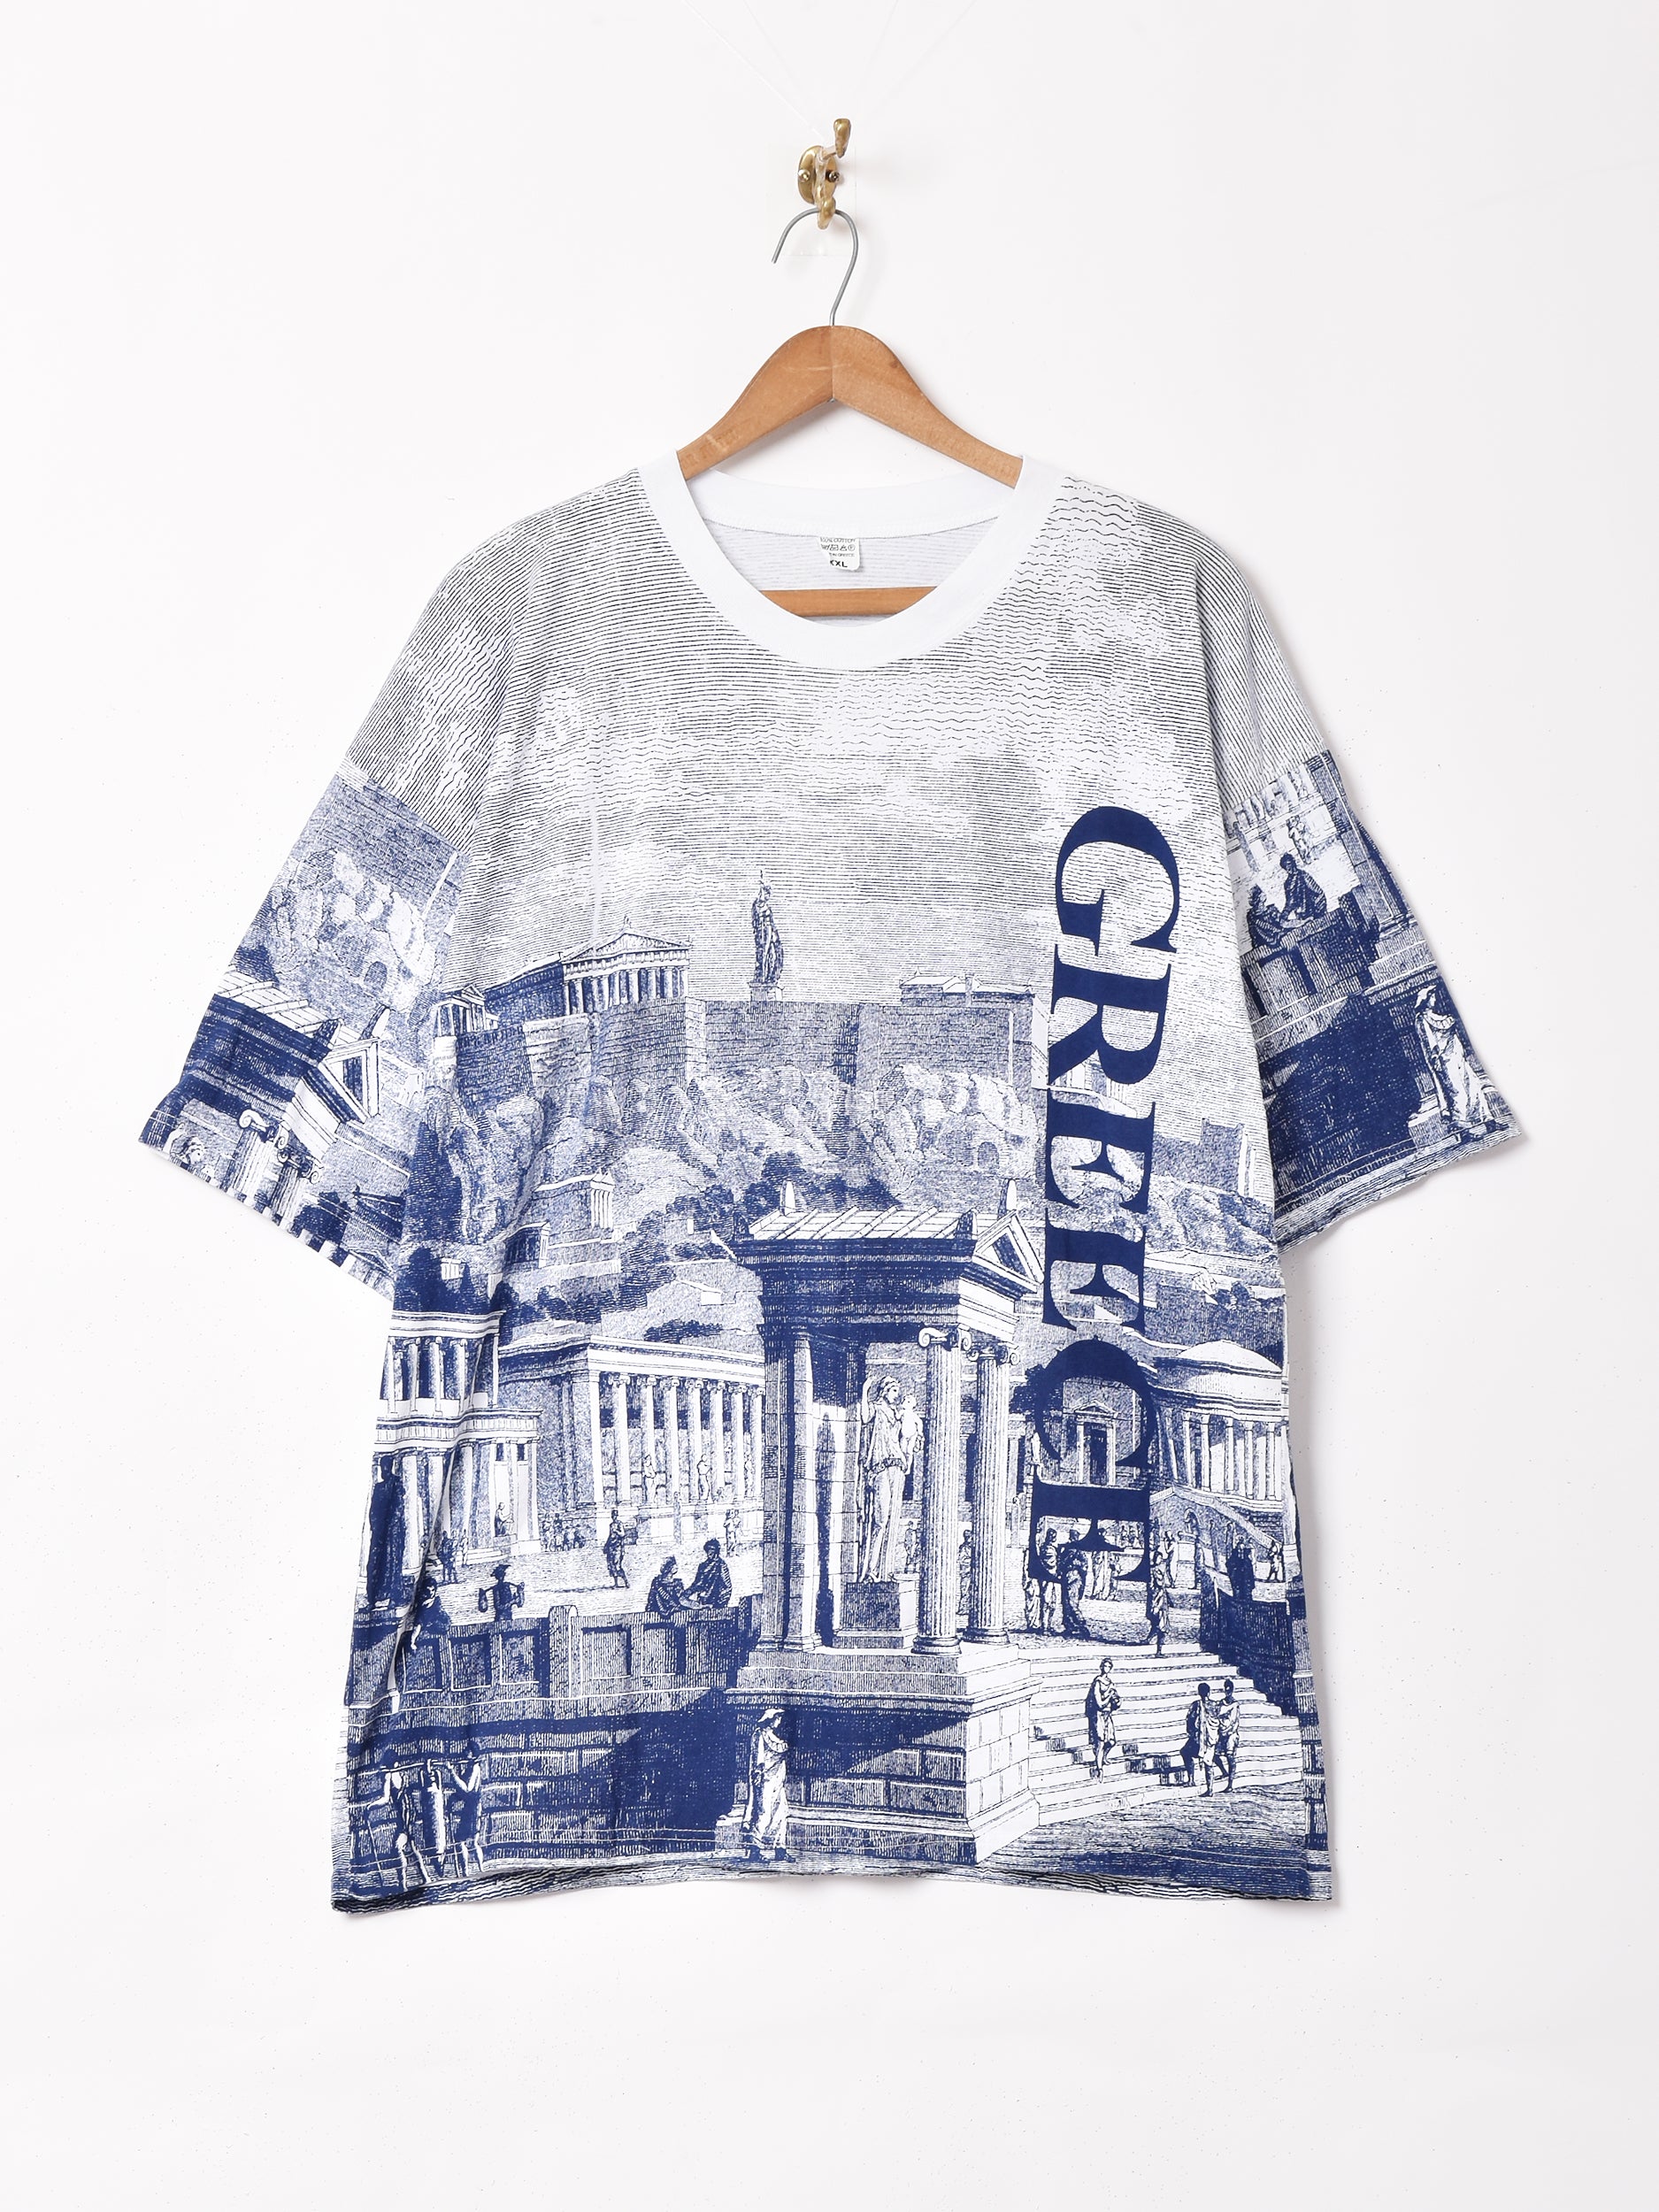 GREECE プリントTシャツ – 古着屋Top of the Hillのネット通販サイト